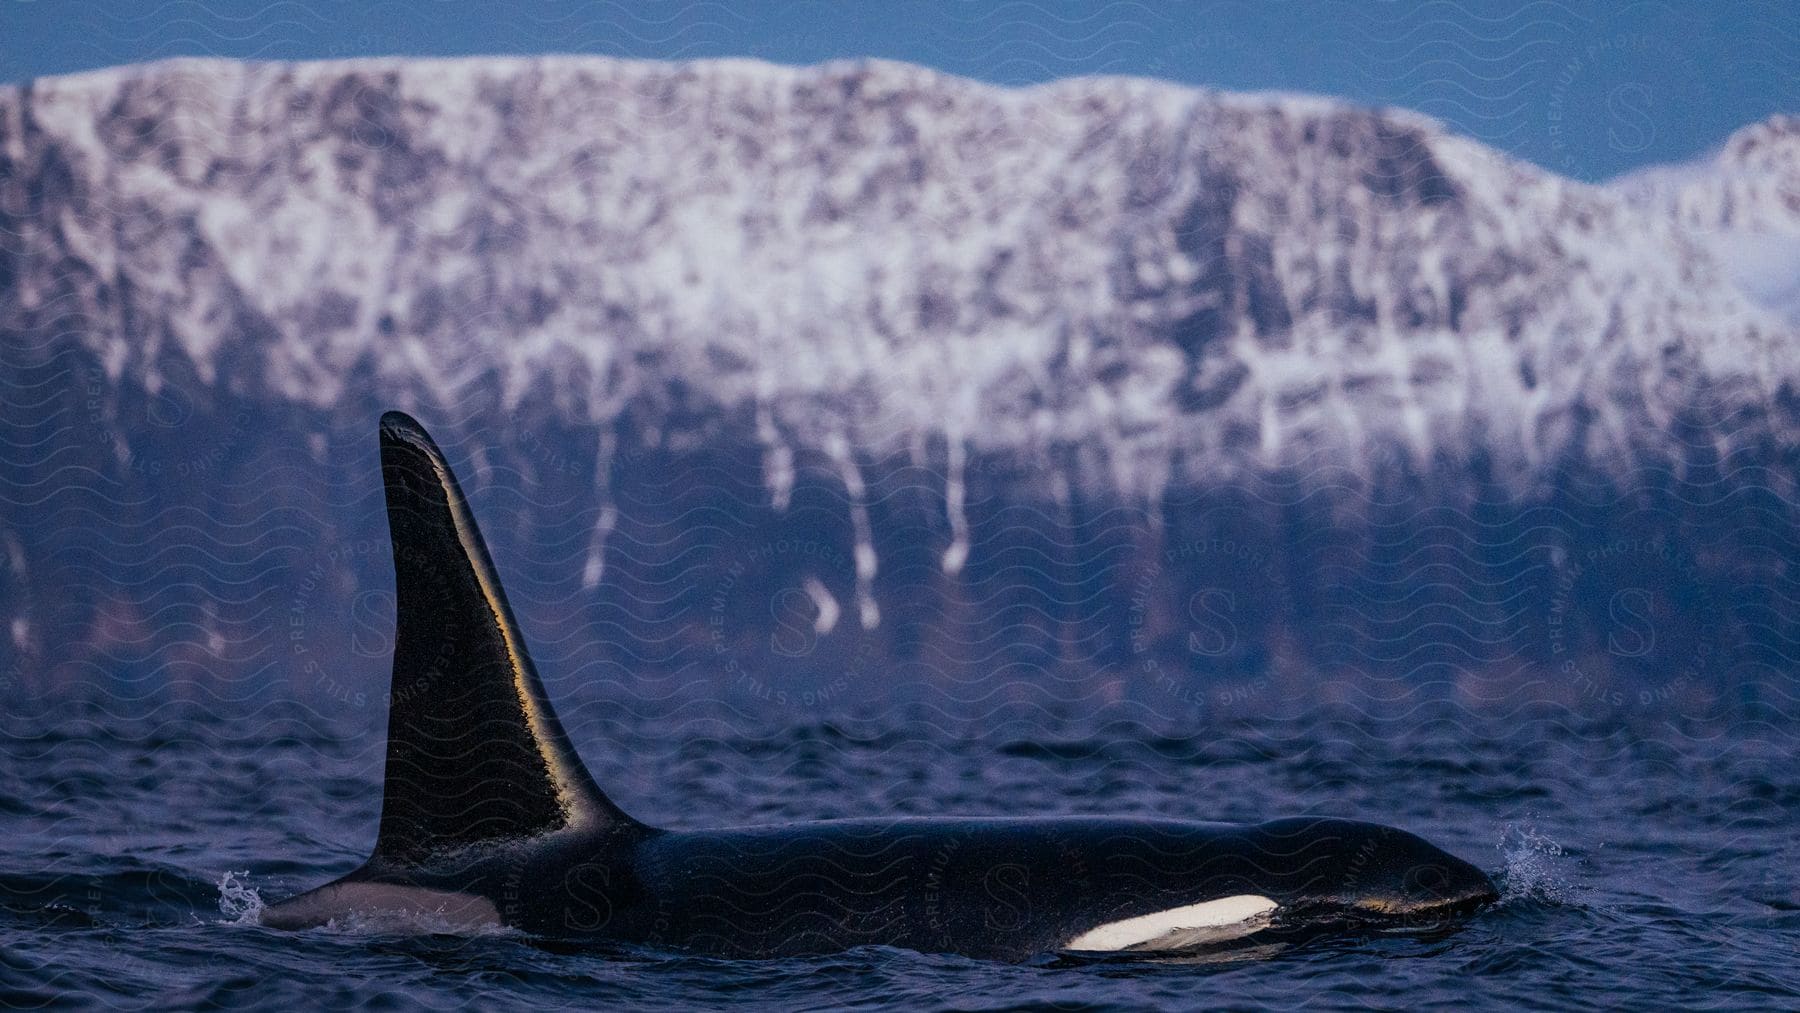 A majestic orca breaches the icy surface of the Arctic Ocean, its powerful body gleaming in the sunlight as it takes a life-sustaining breath.